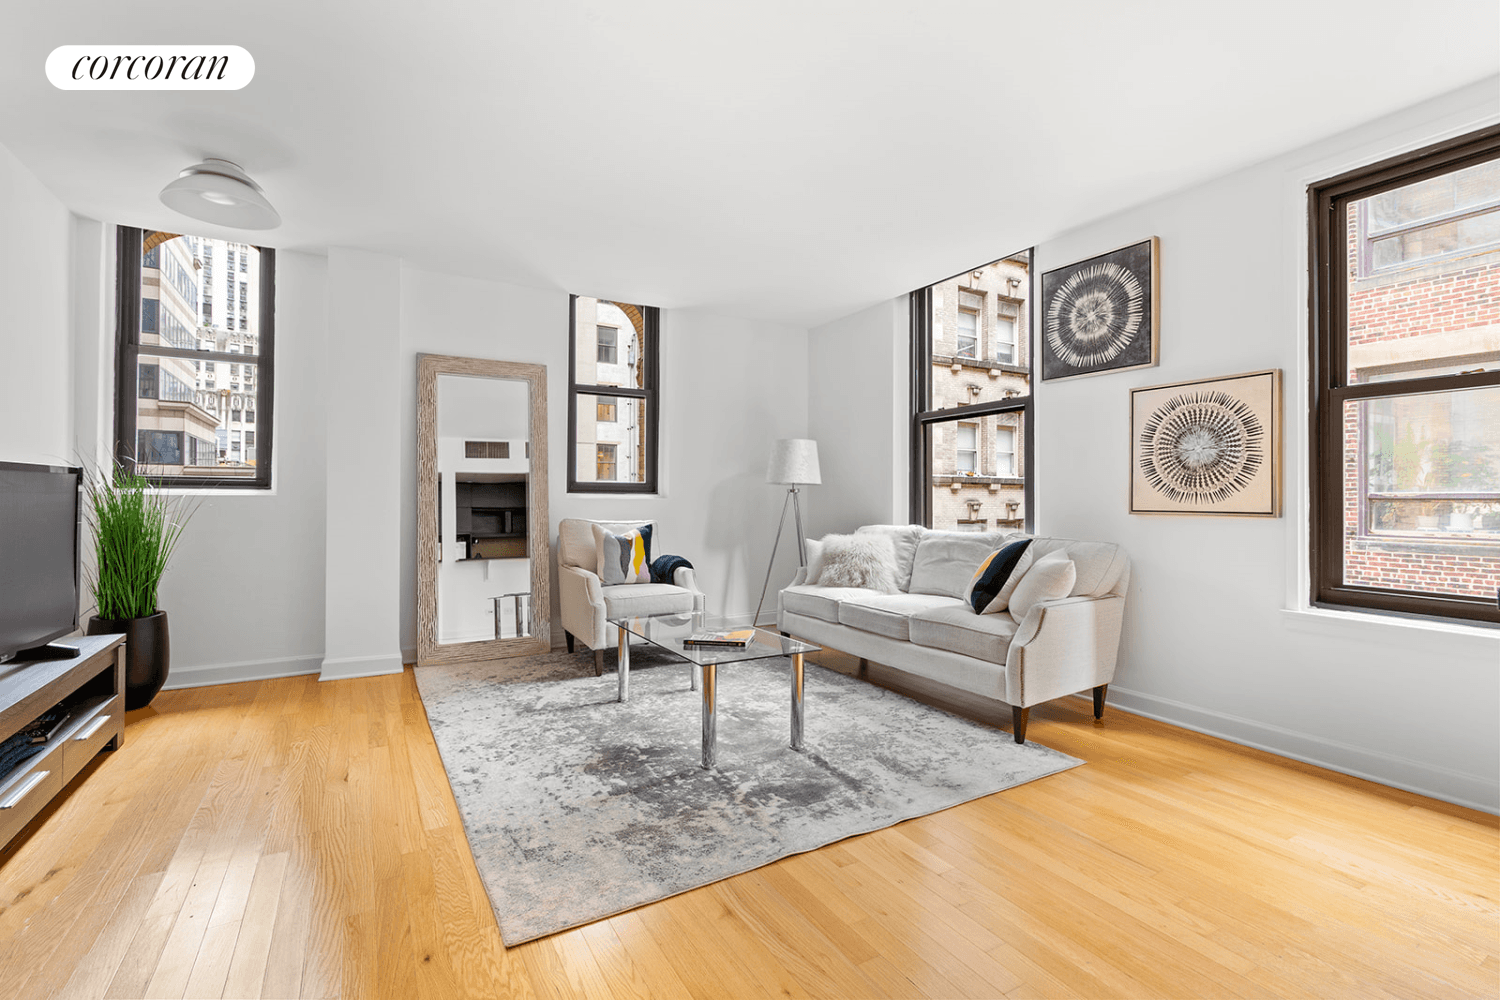 JUST LISTED Bright, oversized TRUE 1 bedroom with central air, high ceilings, and tons of windows.